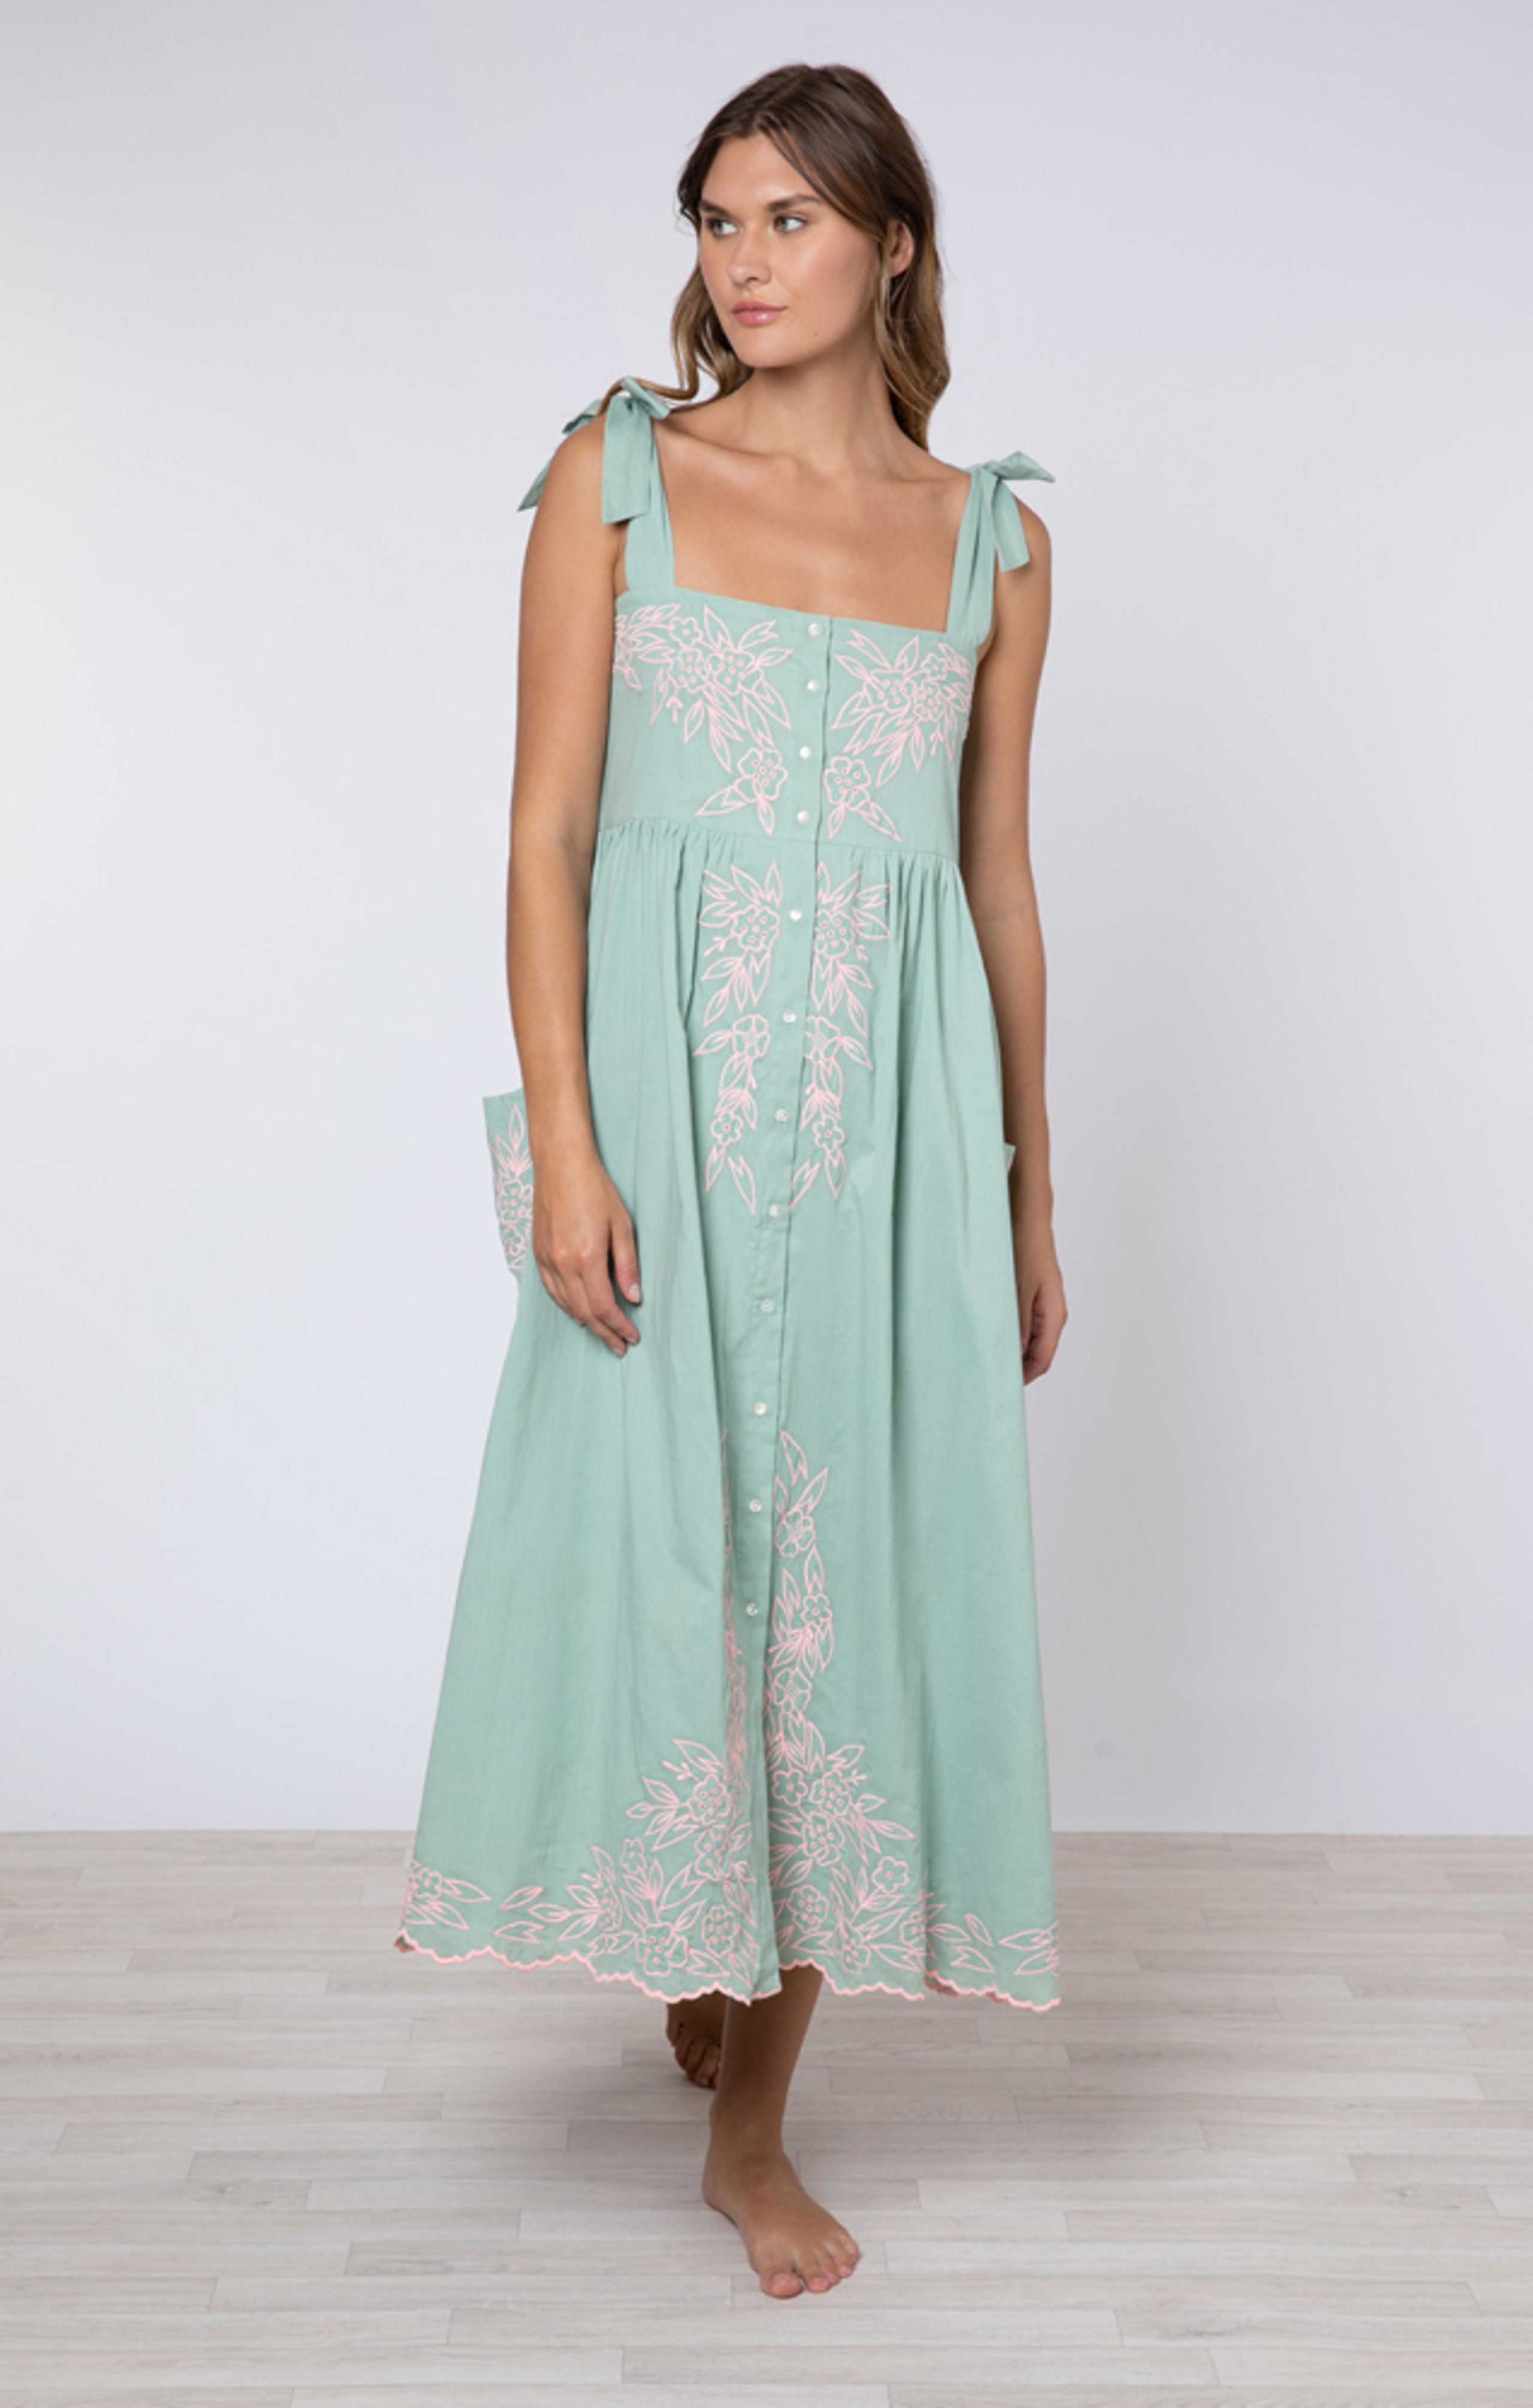 Juliet Dunn Tie Shoulder Dress, Flower Embroidery Sage Candy | Monkee's of Mount Pleasant